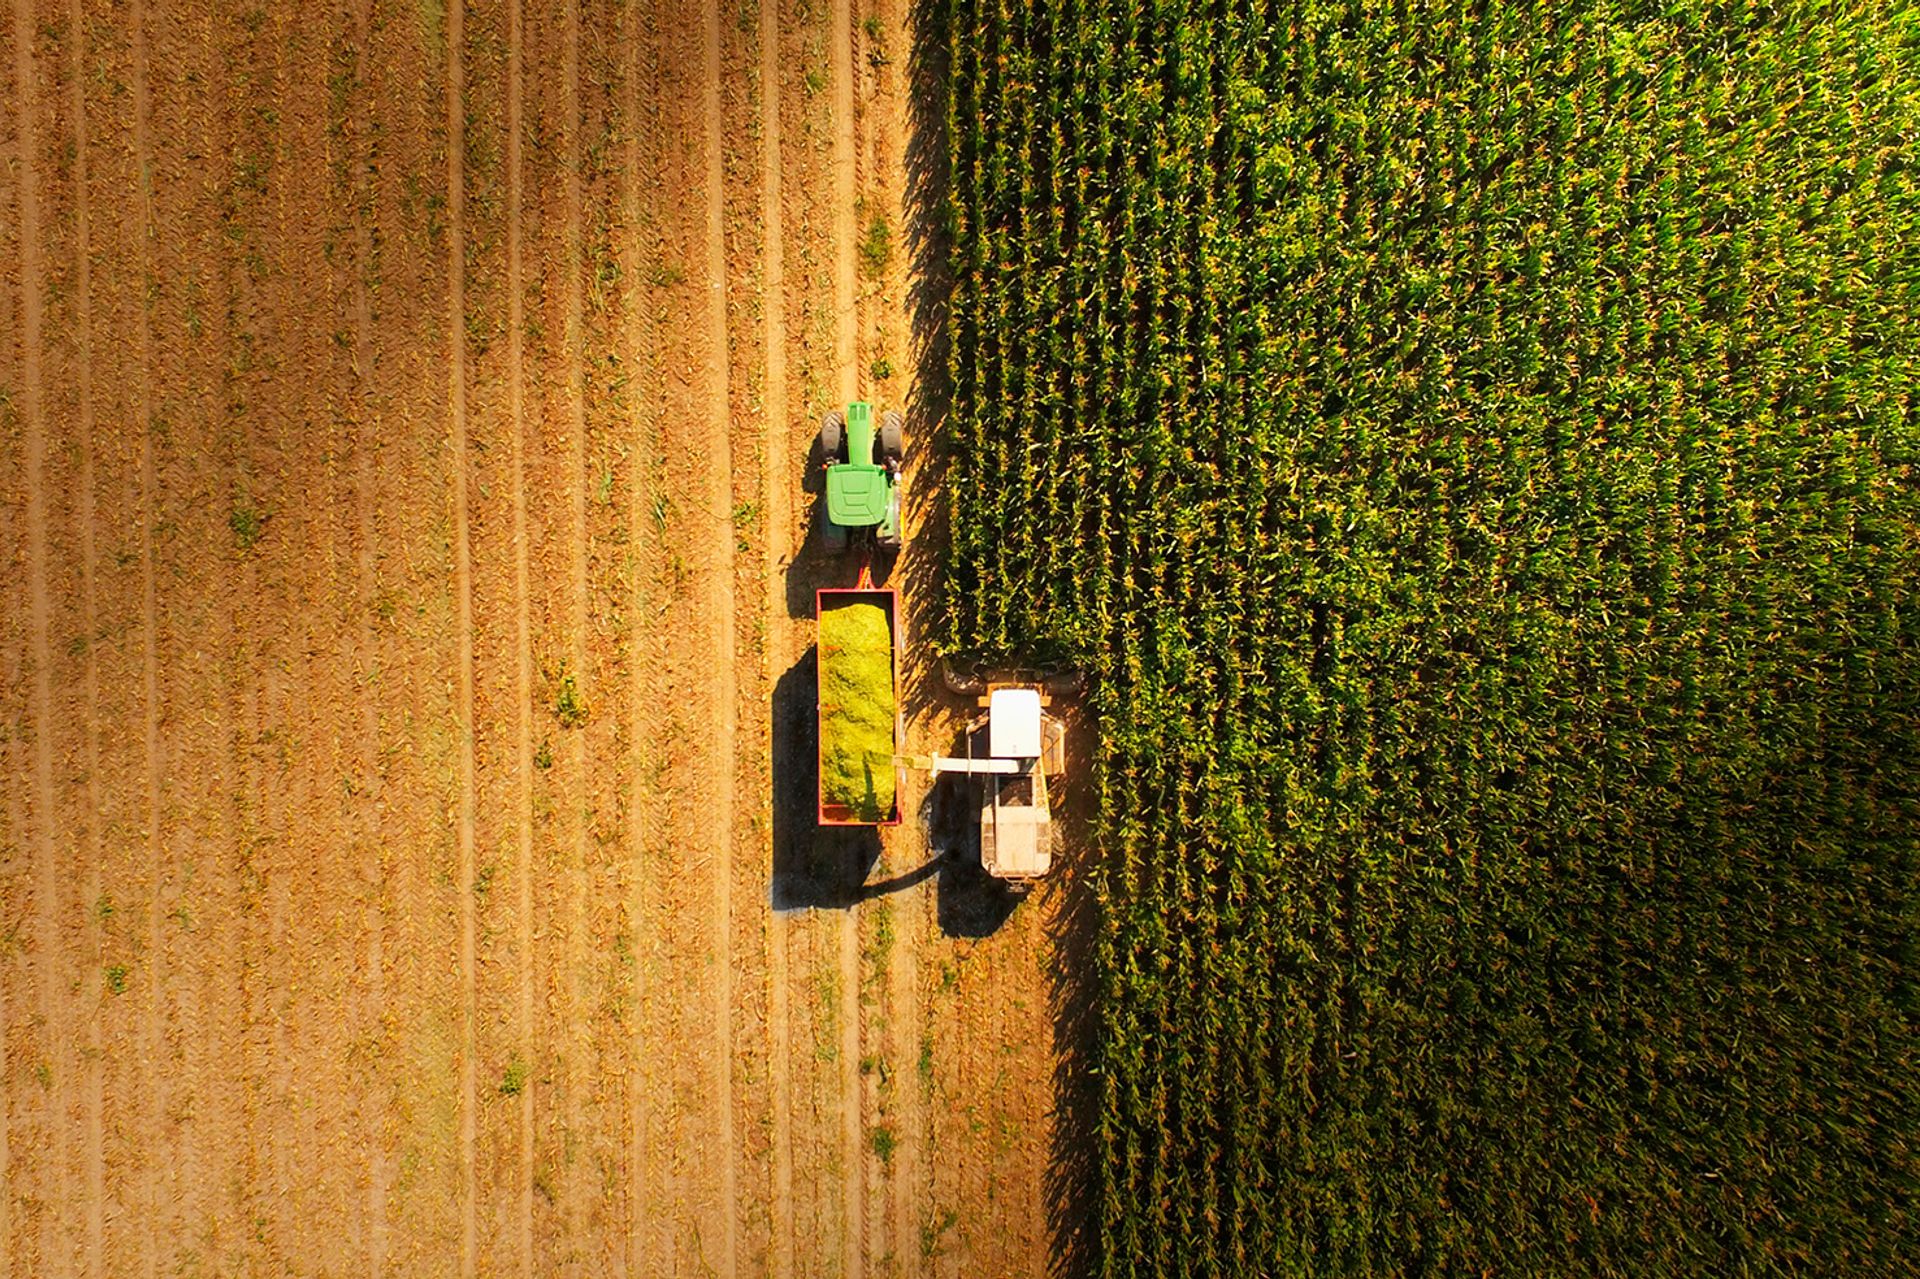 Image of a combine harvester from above working in a field